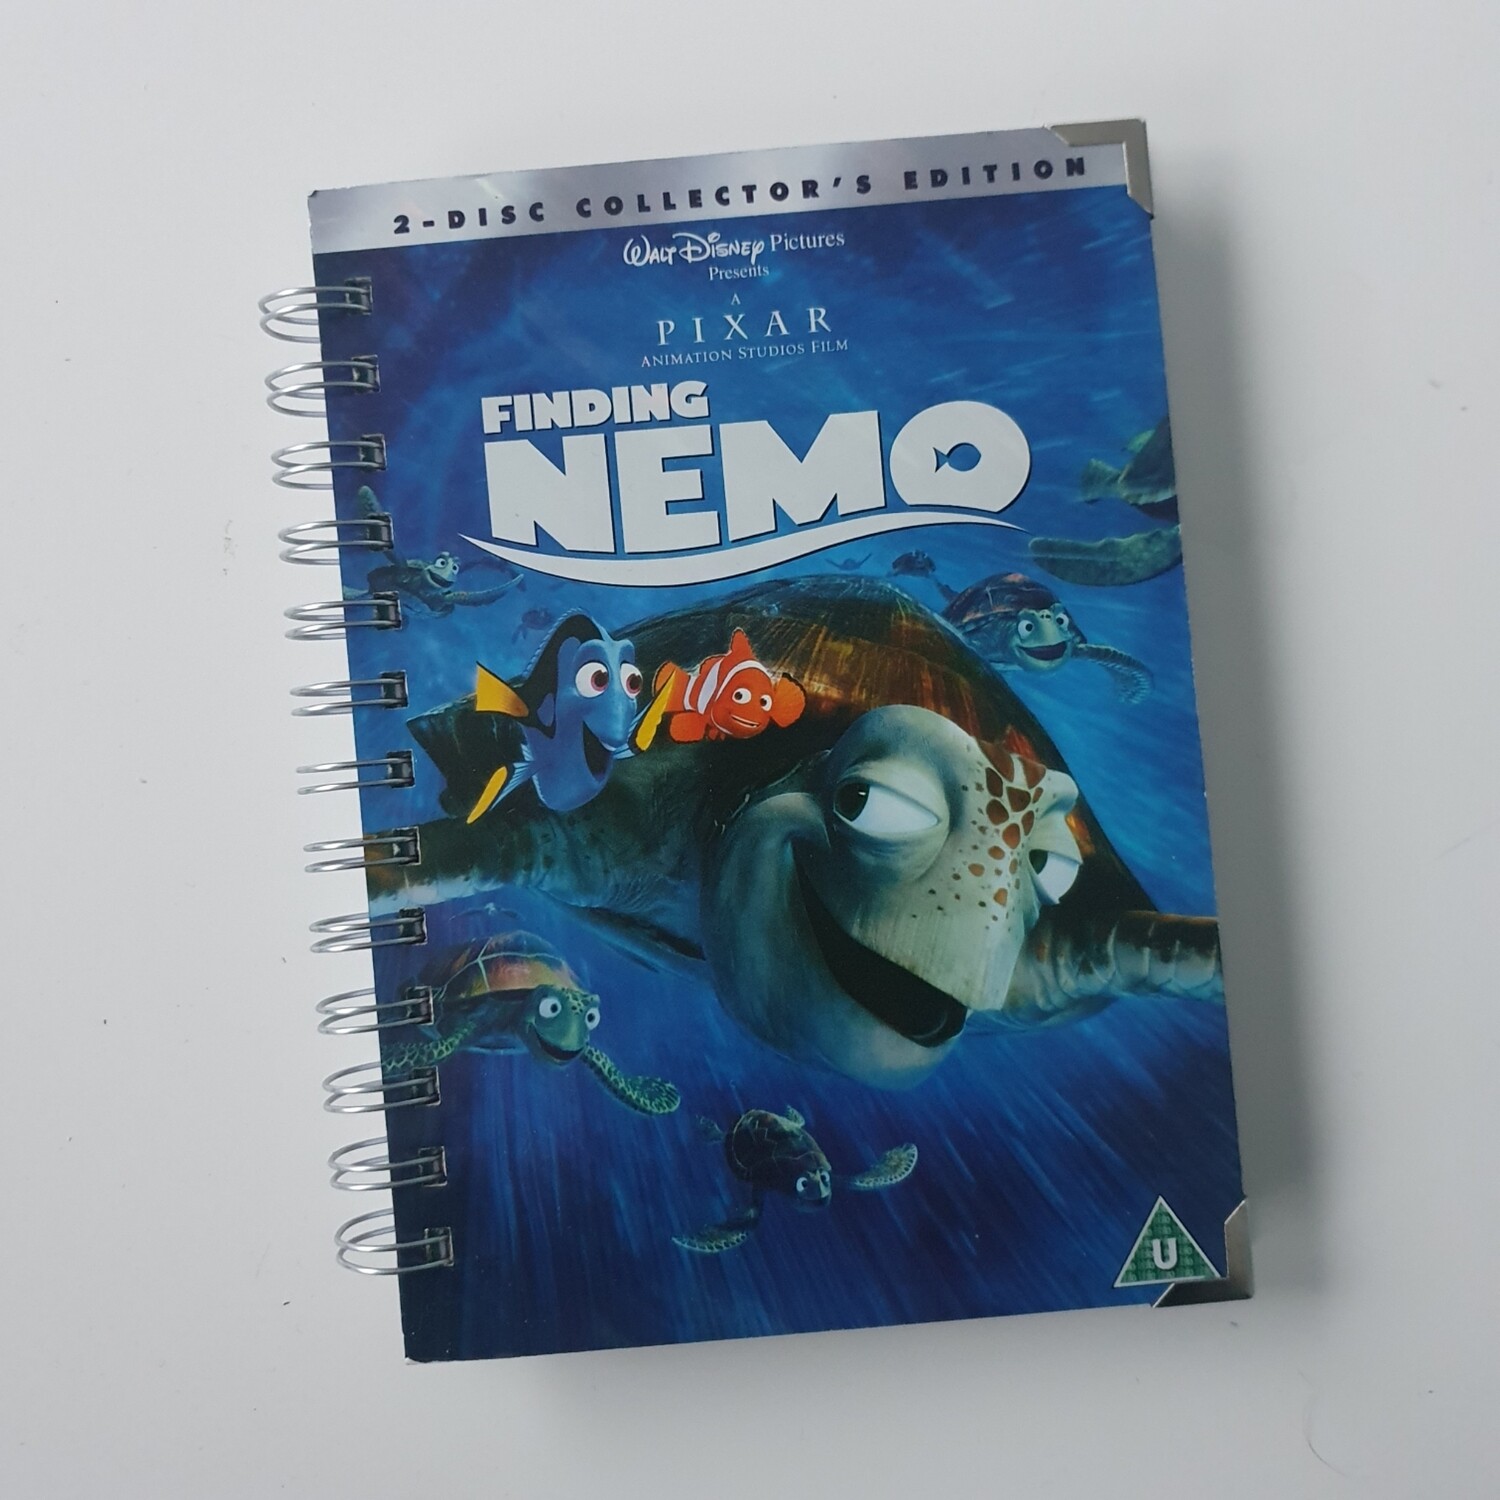 Finding Nemo plain paper Notebook - made from a DVD sleeve, READY TO SHIP